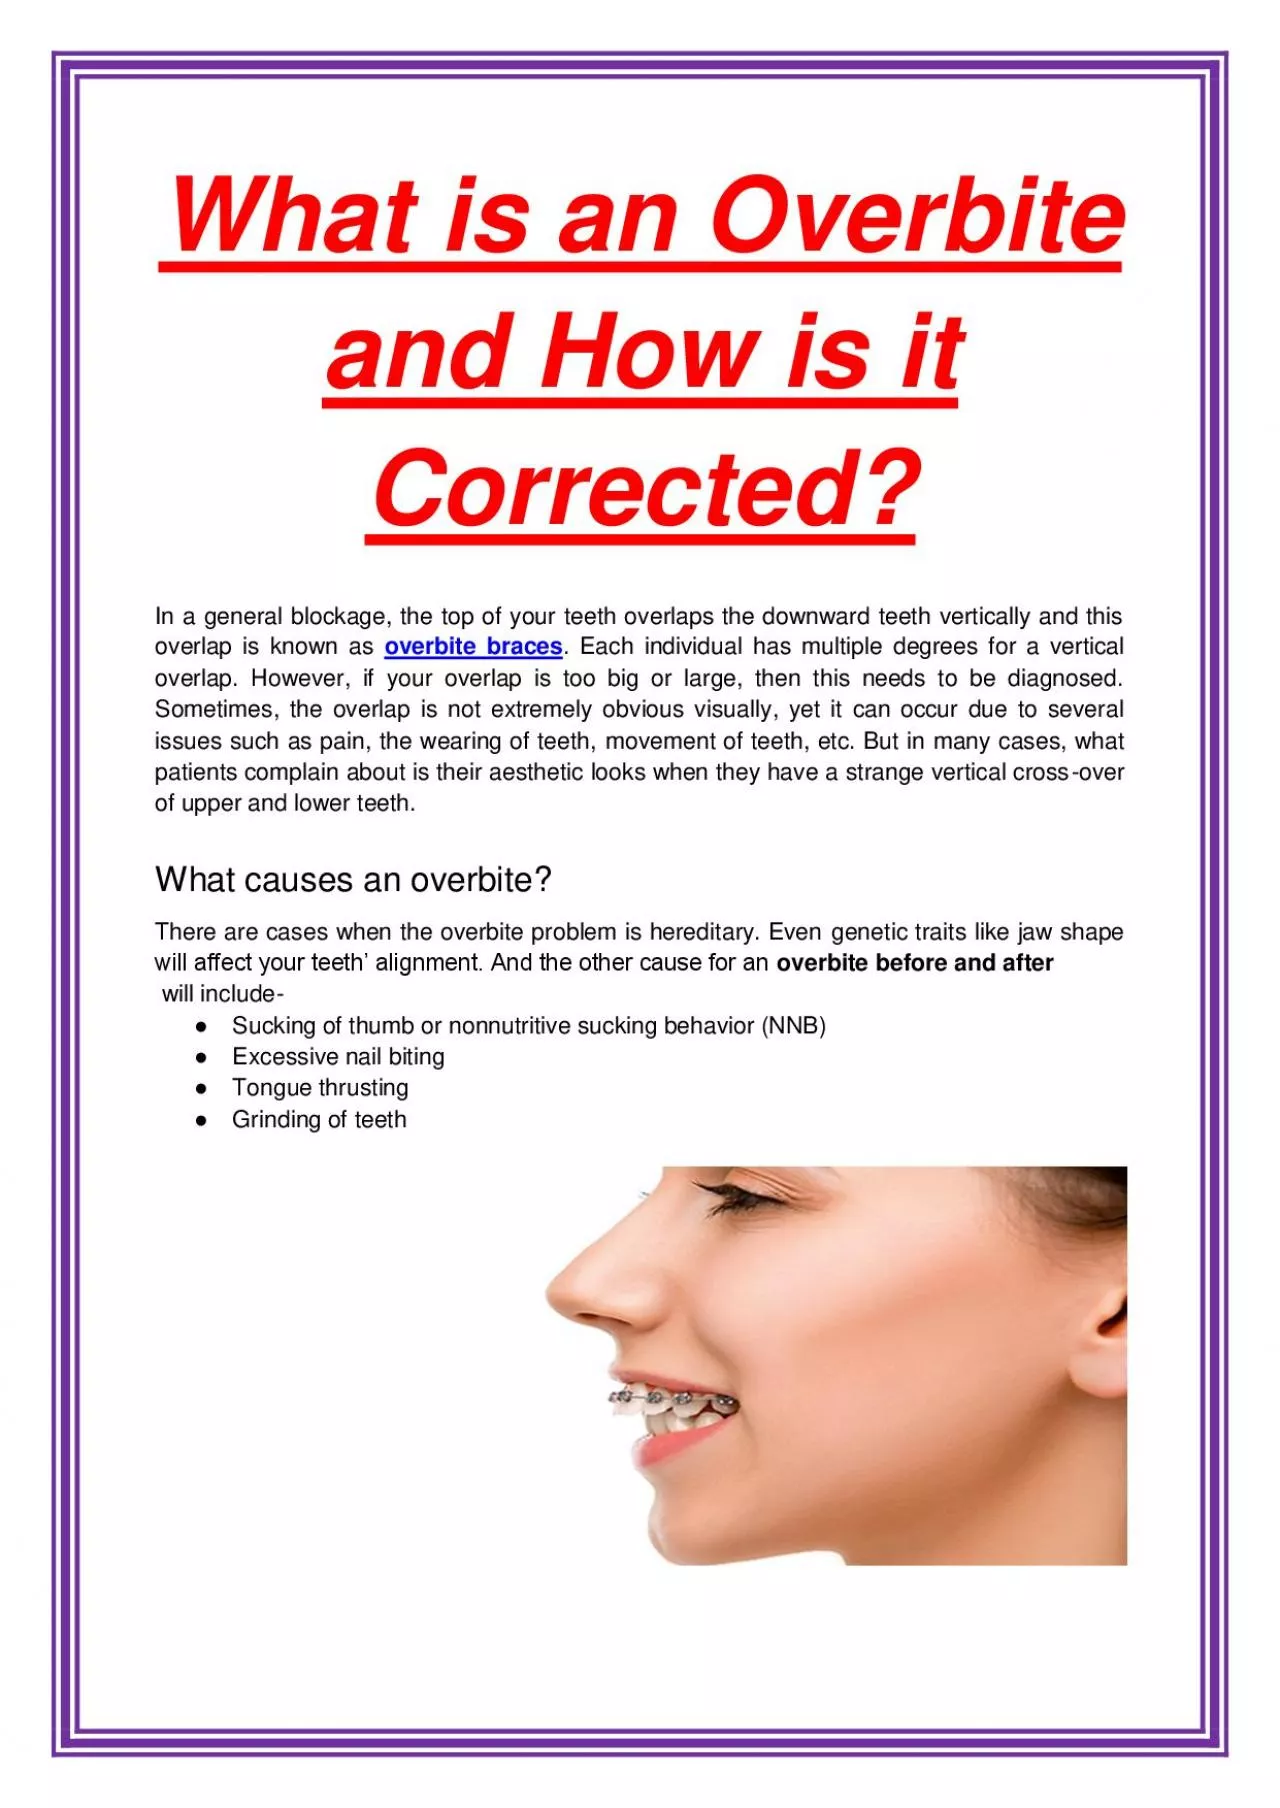 What is an Overbite and How is it Corrected?